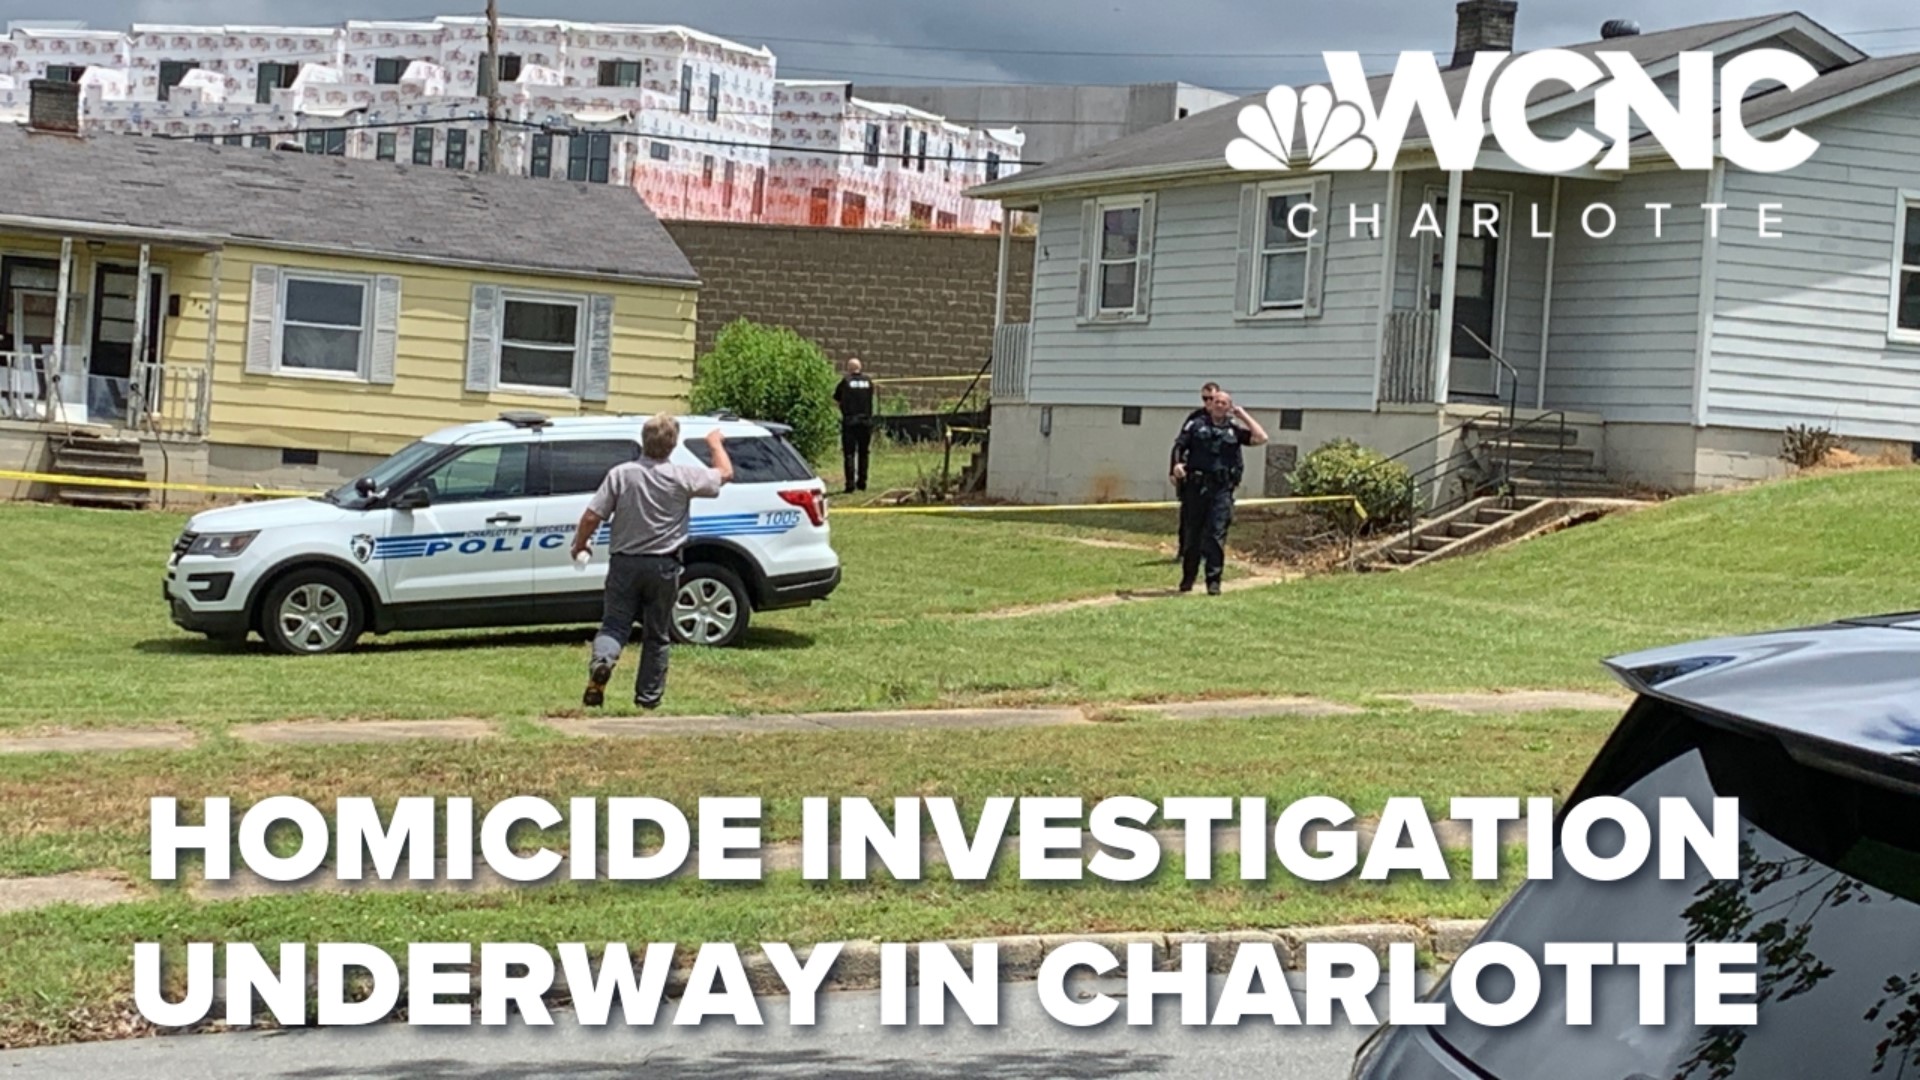 Anyone with information is asked to contact the Charlotte-Mecklenburg Police Department.